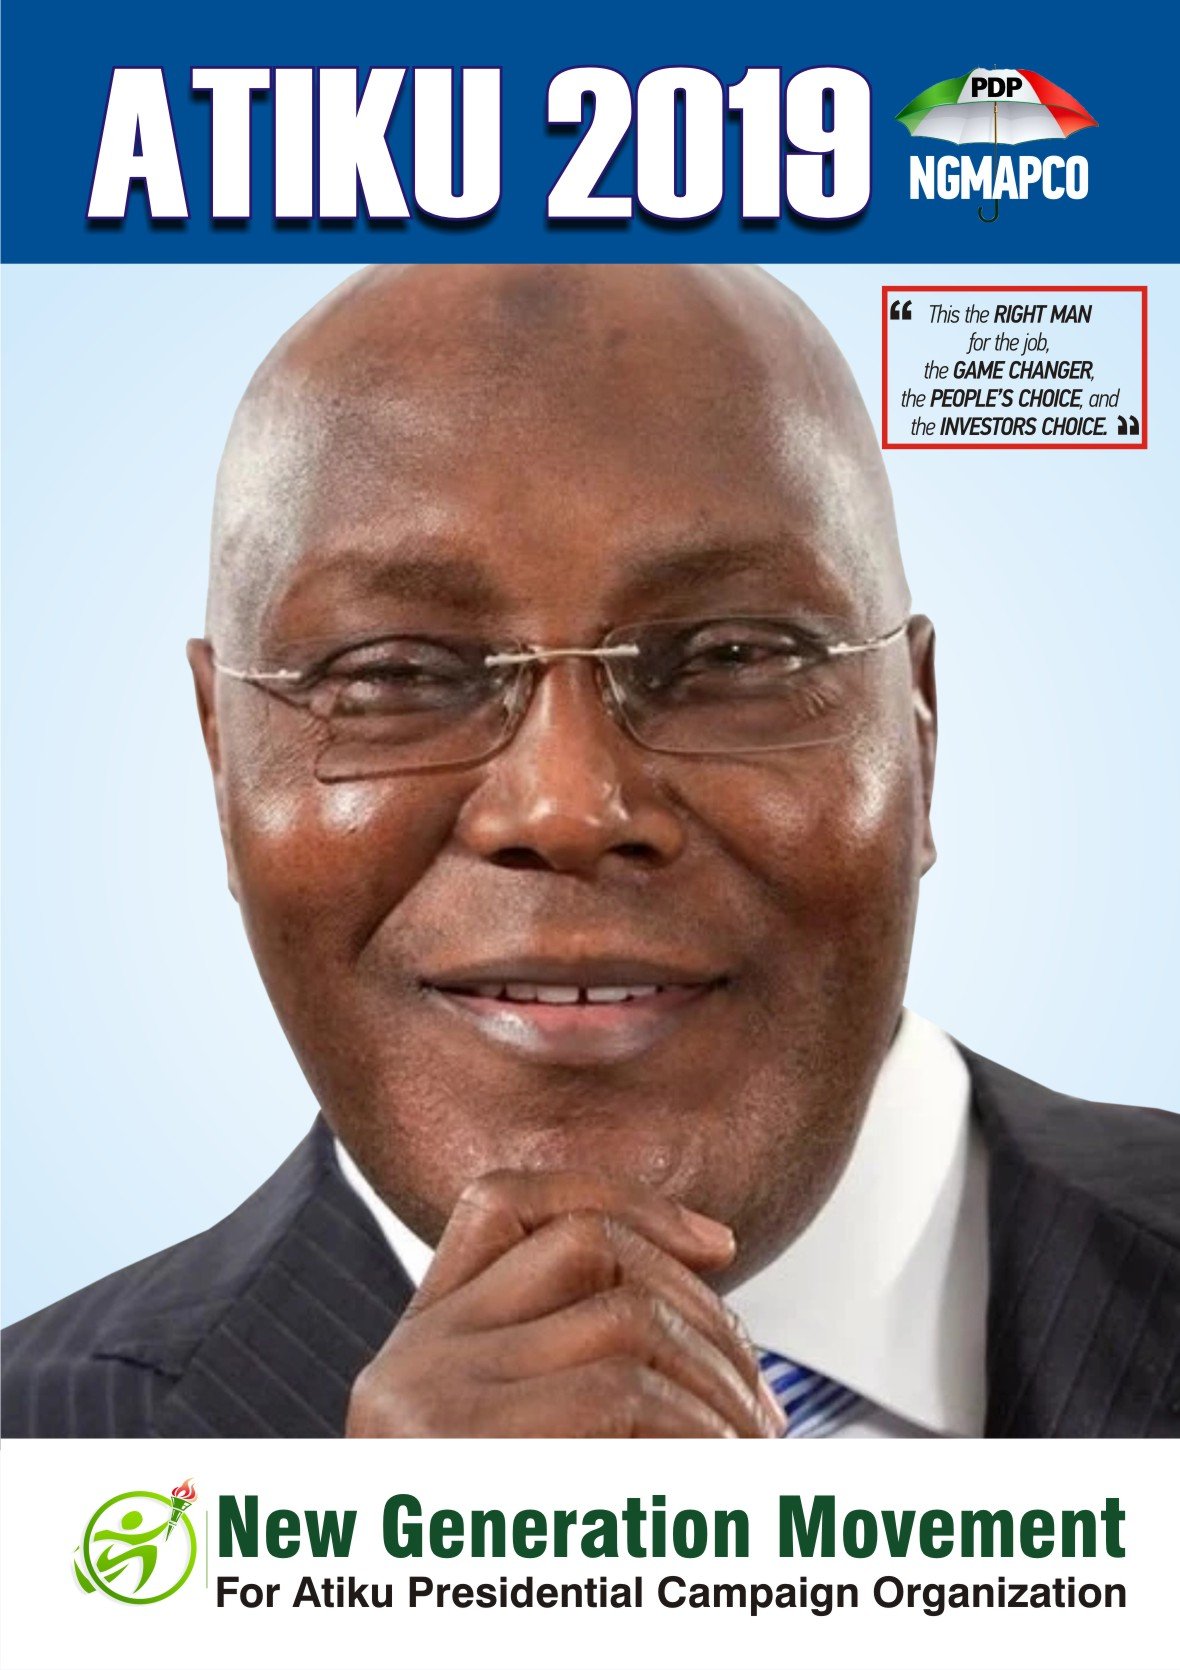 New generation movement for Atiku presidential campaign organization is a political organization for Atikus presidential Ambition.